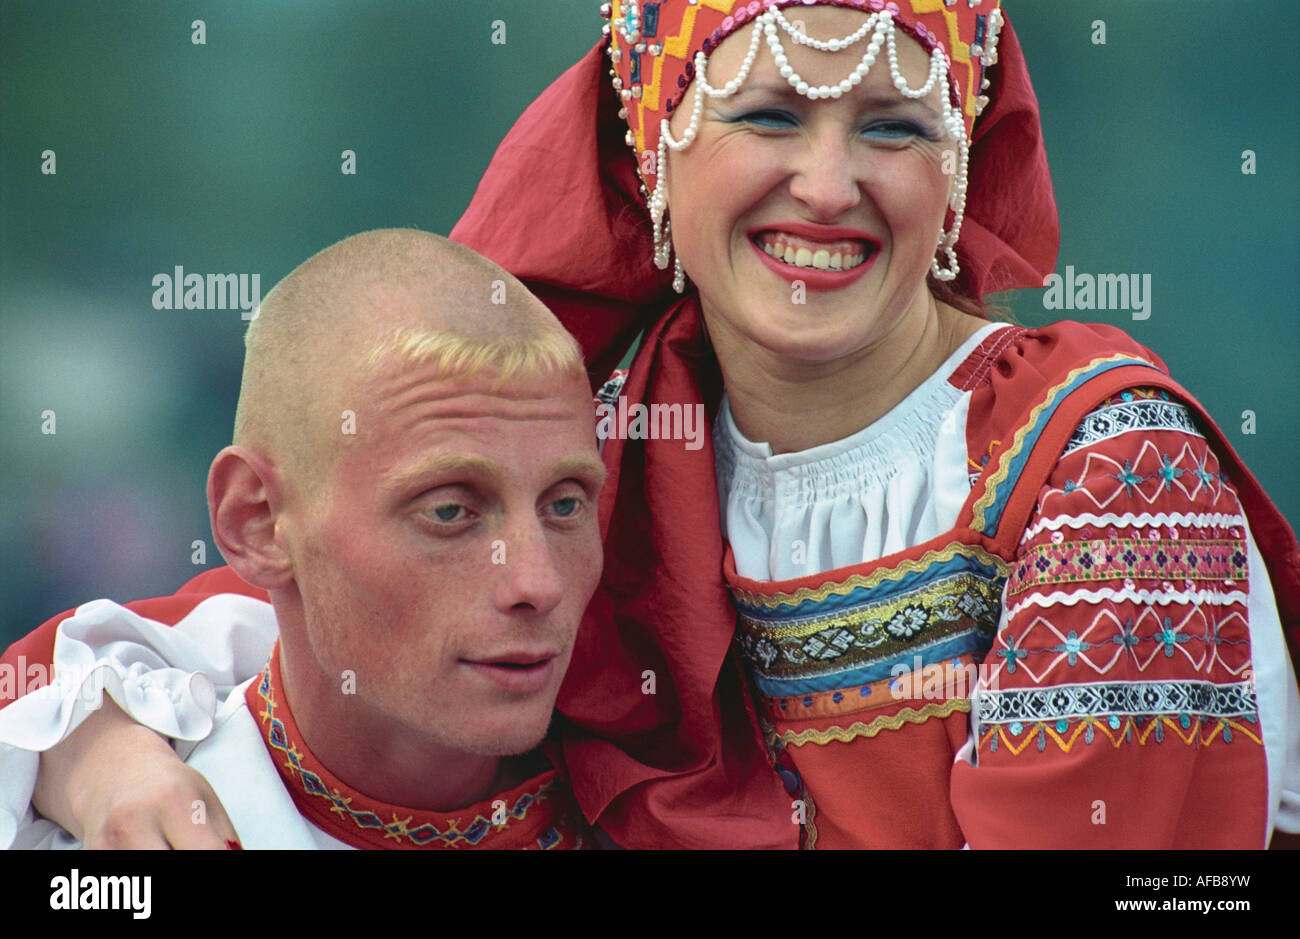 Portrait of man and woman in Russian native raiment. El-Oiyn - national festival of Altaic people. Russia Stock Photo